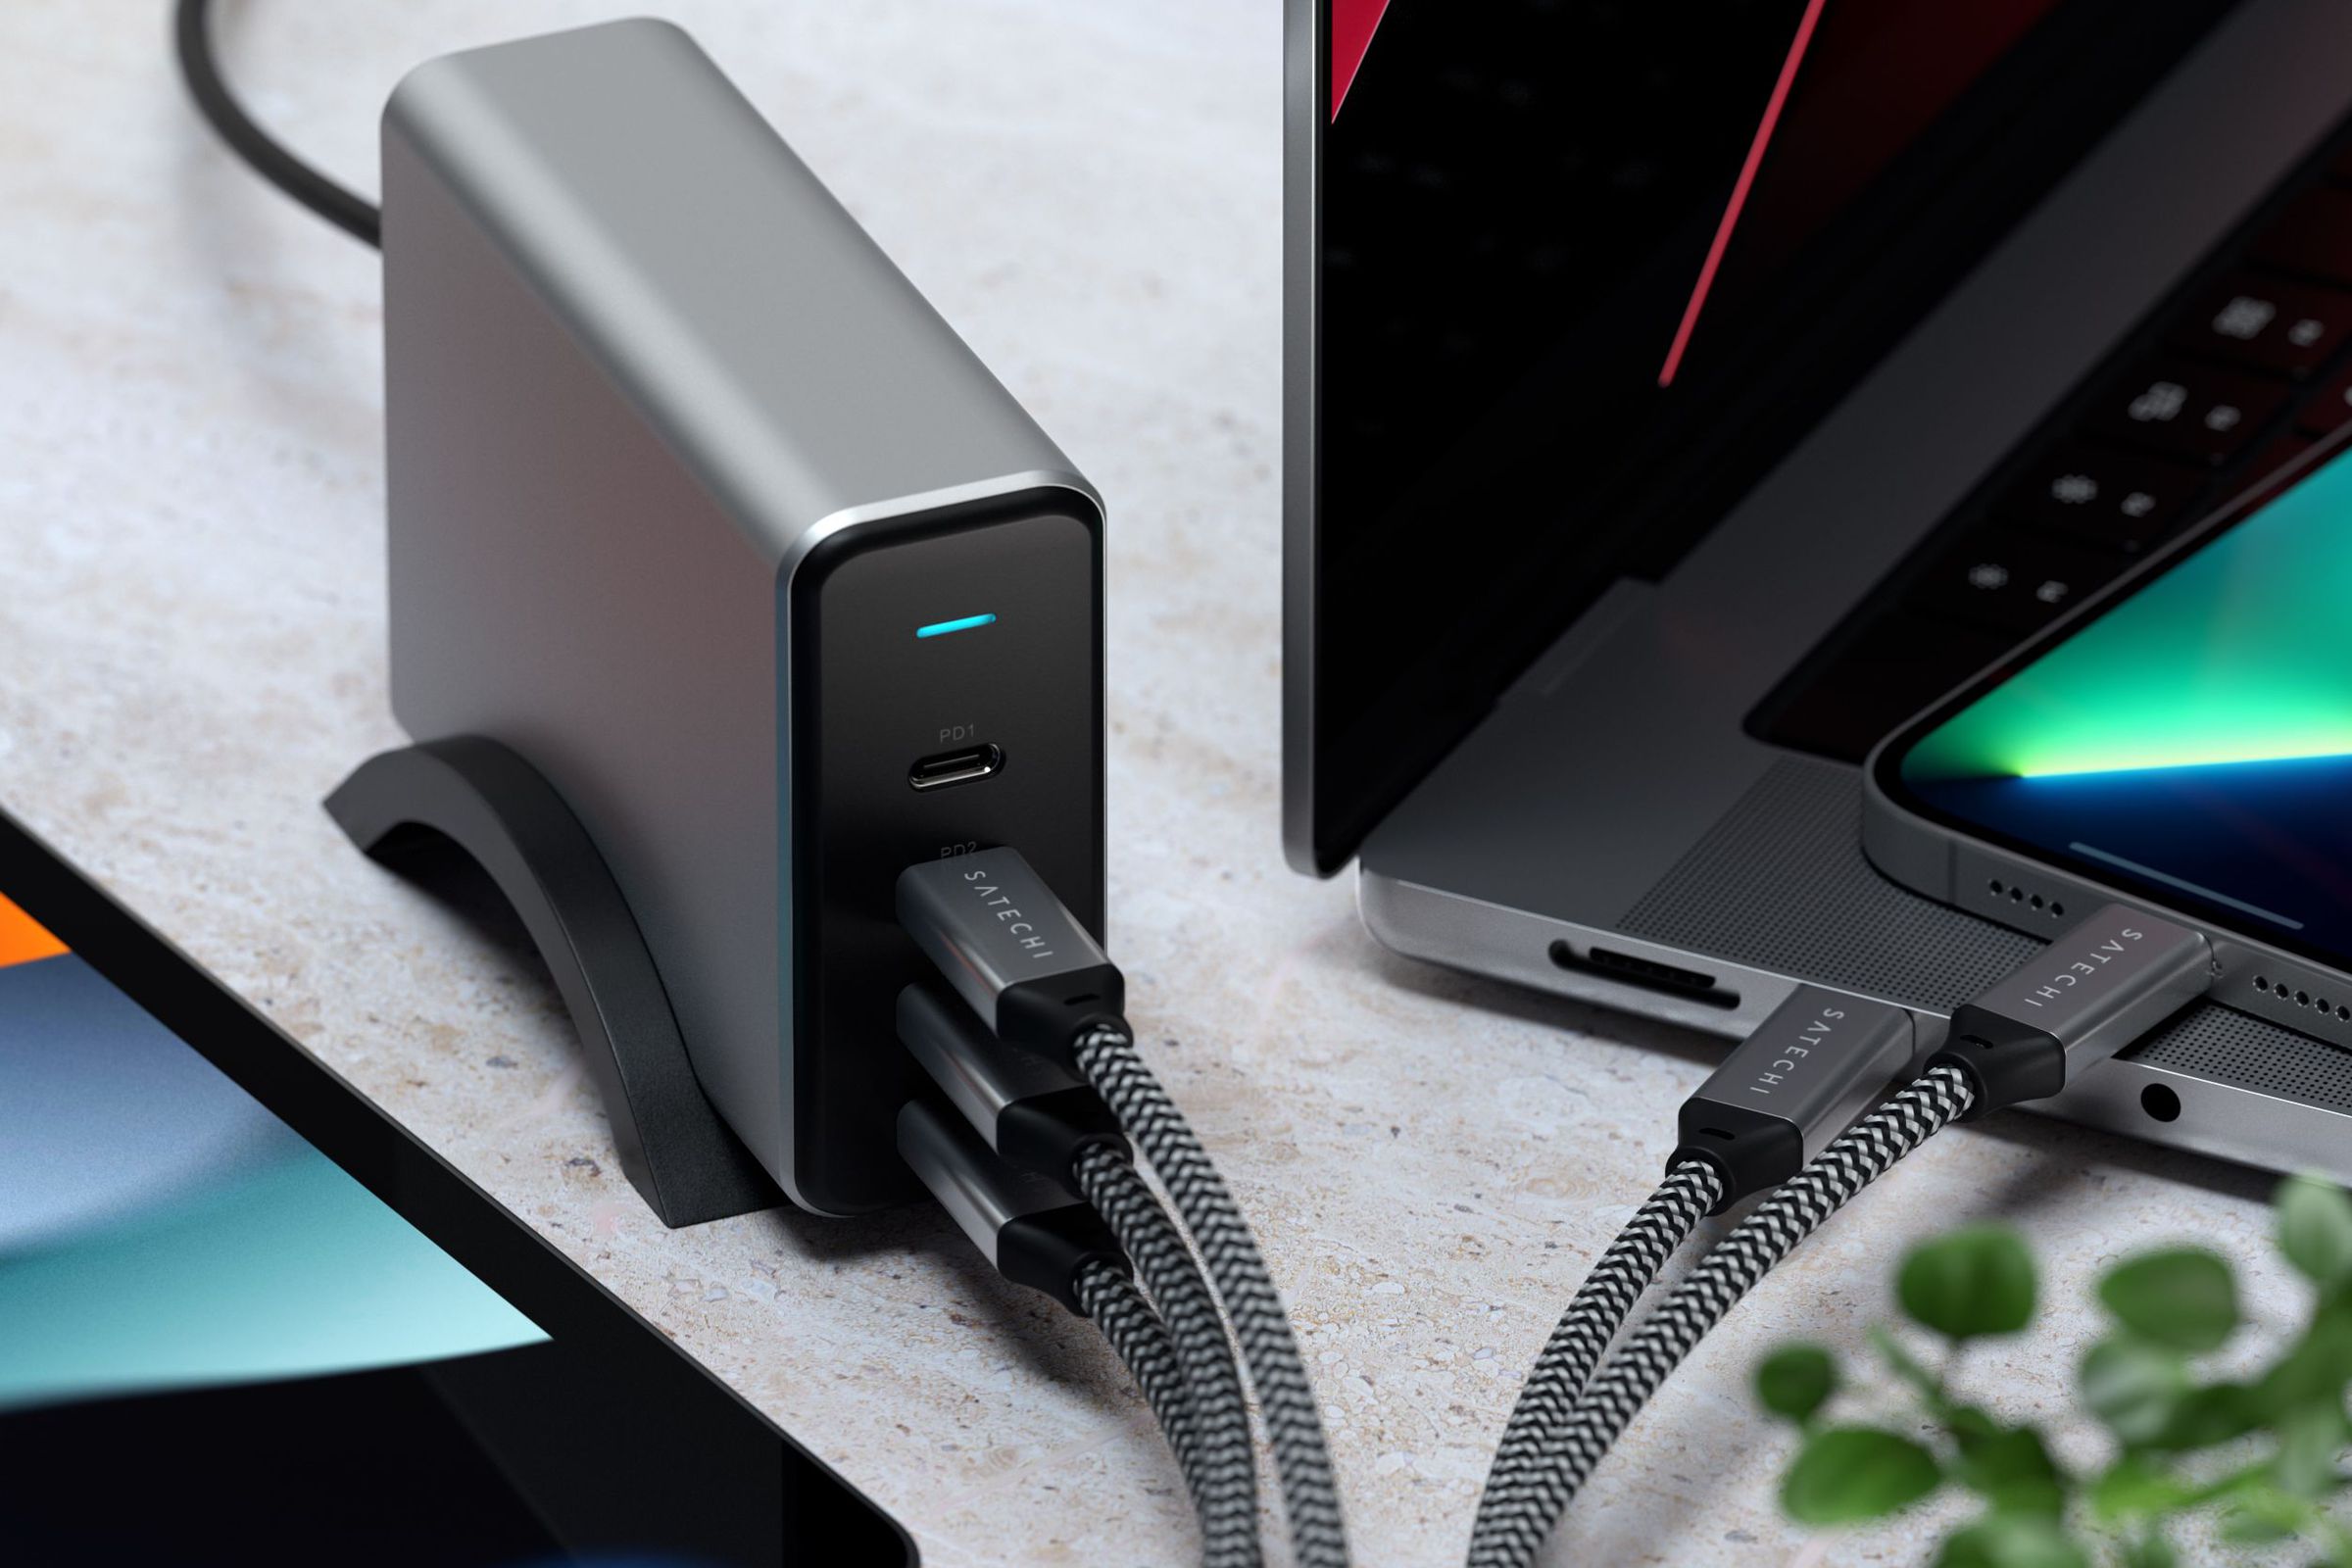 This charger can provide a single device with 100W, even with two other devices plugged in.